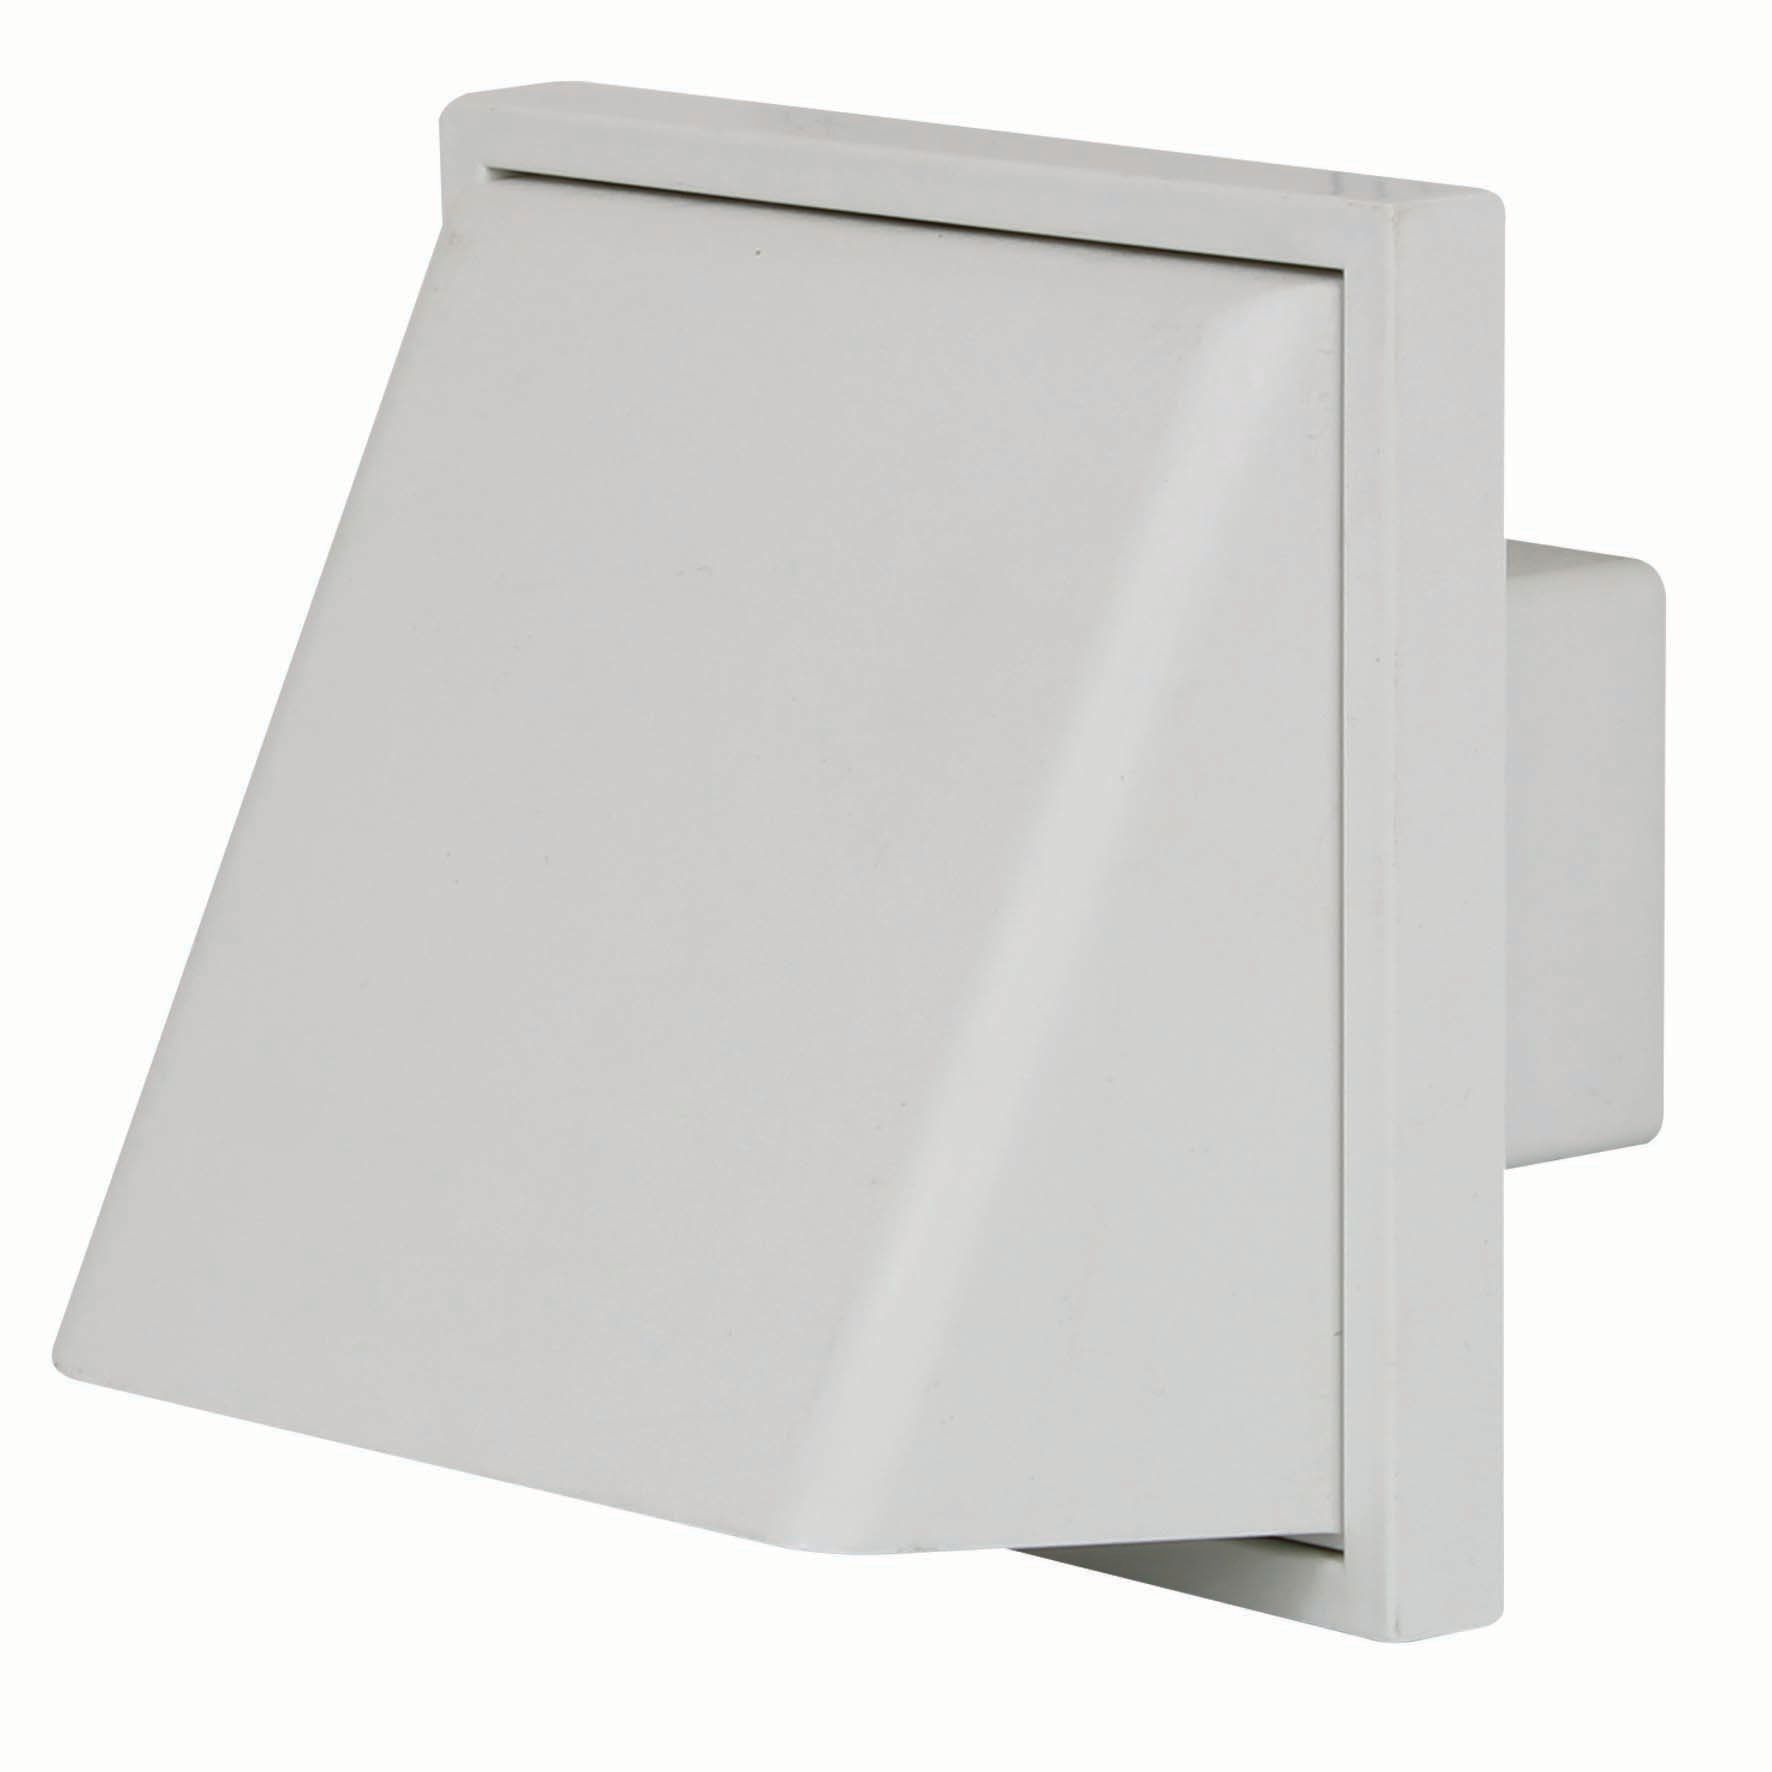 Image of Manrose PVC External Cowled Vent - White 101.6mm